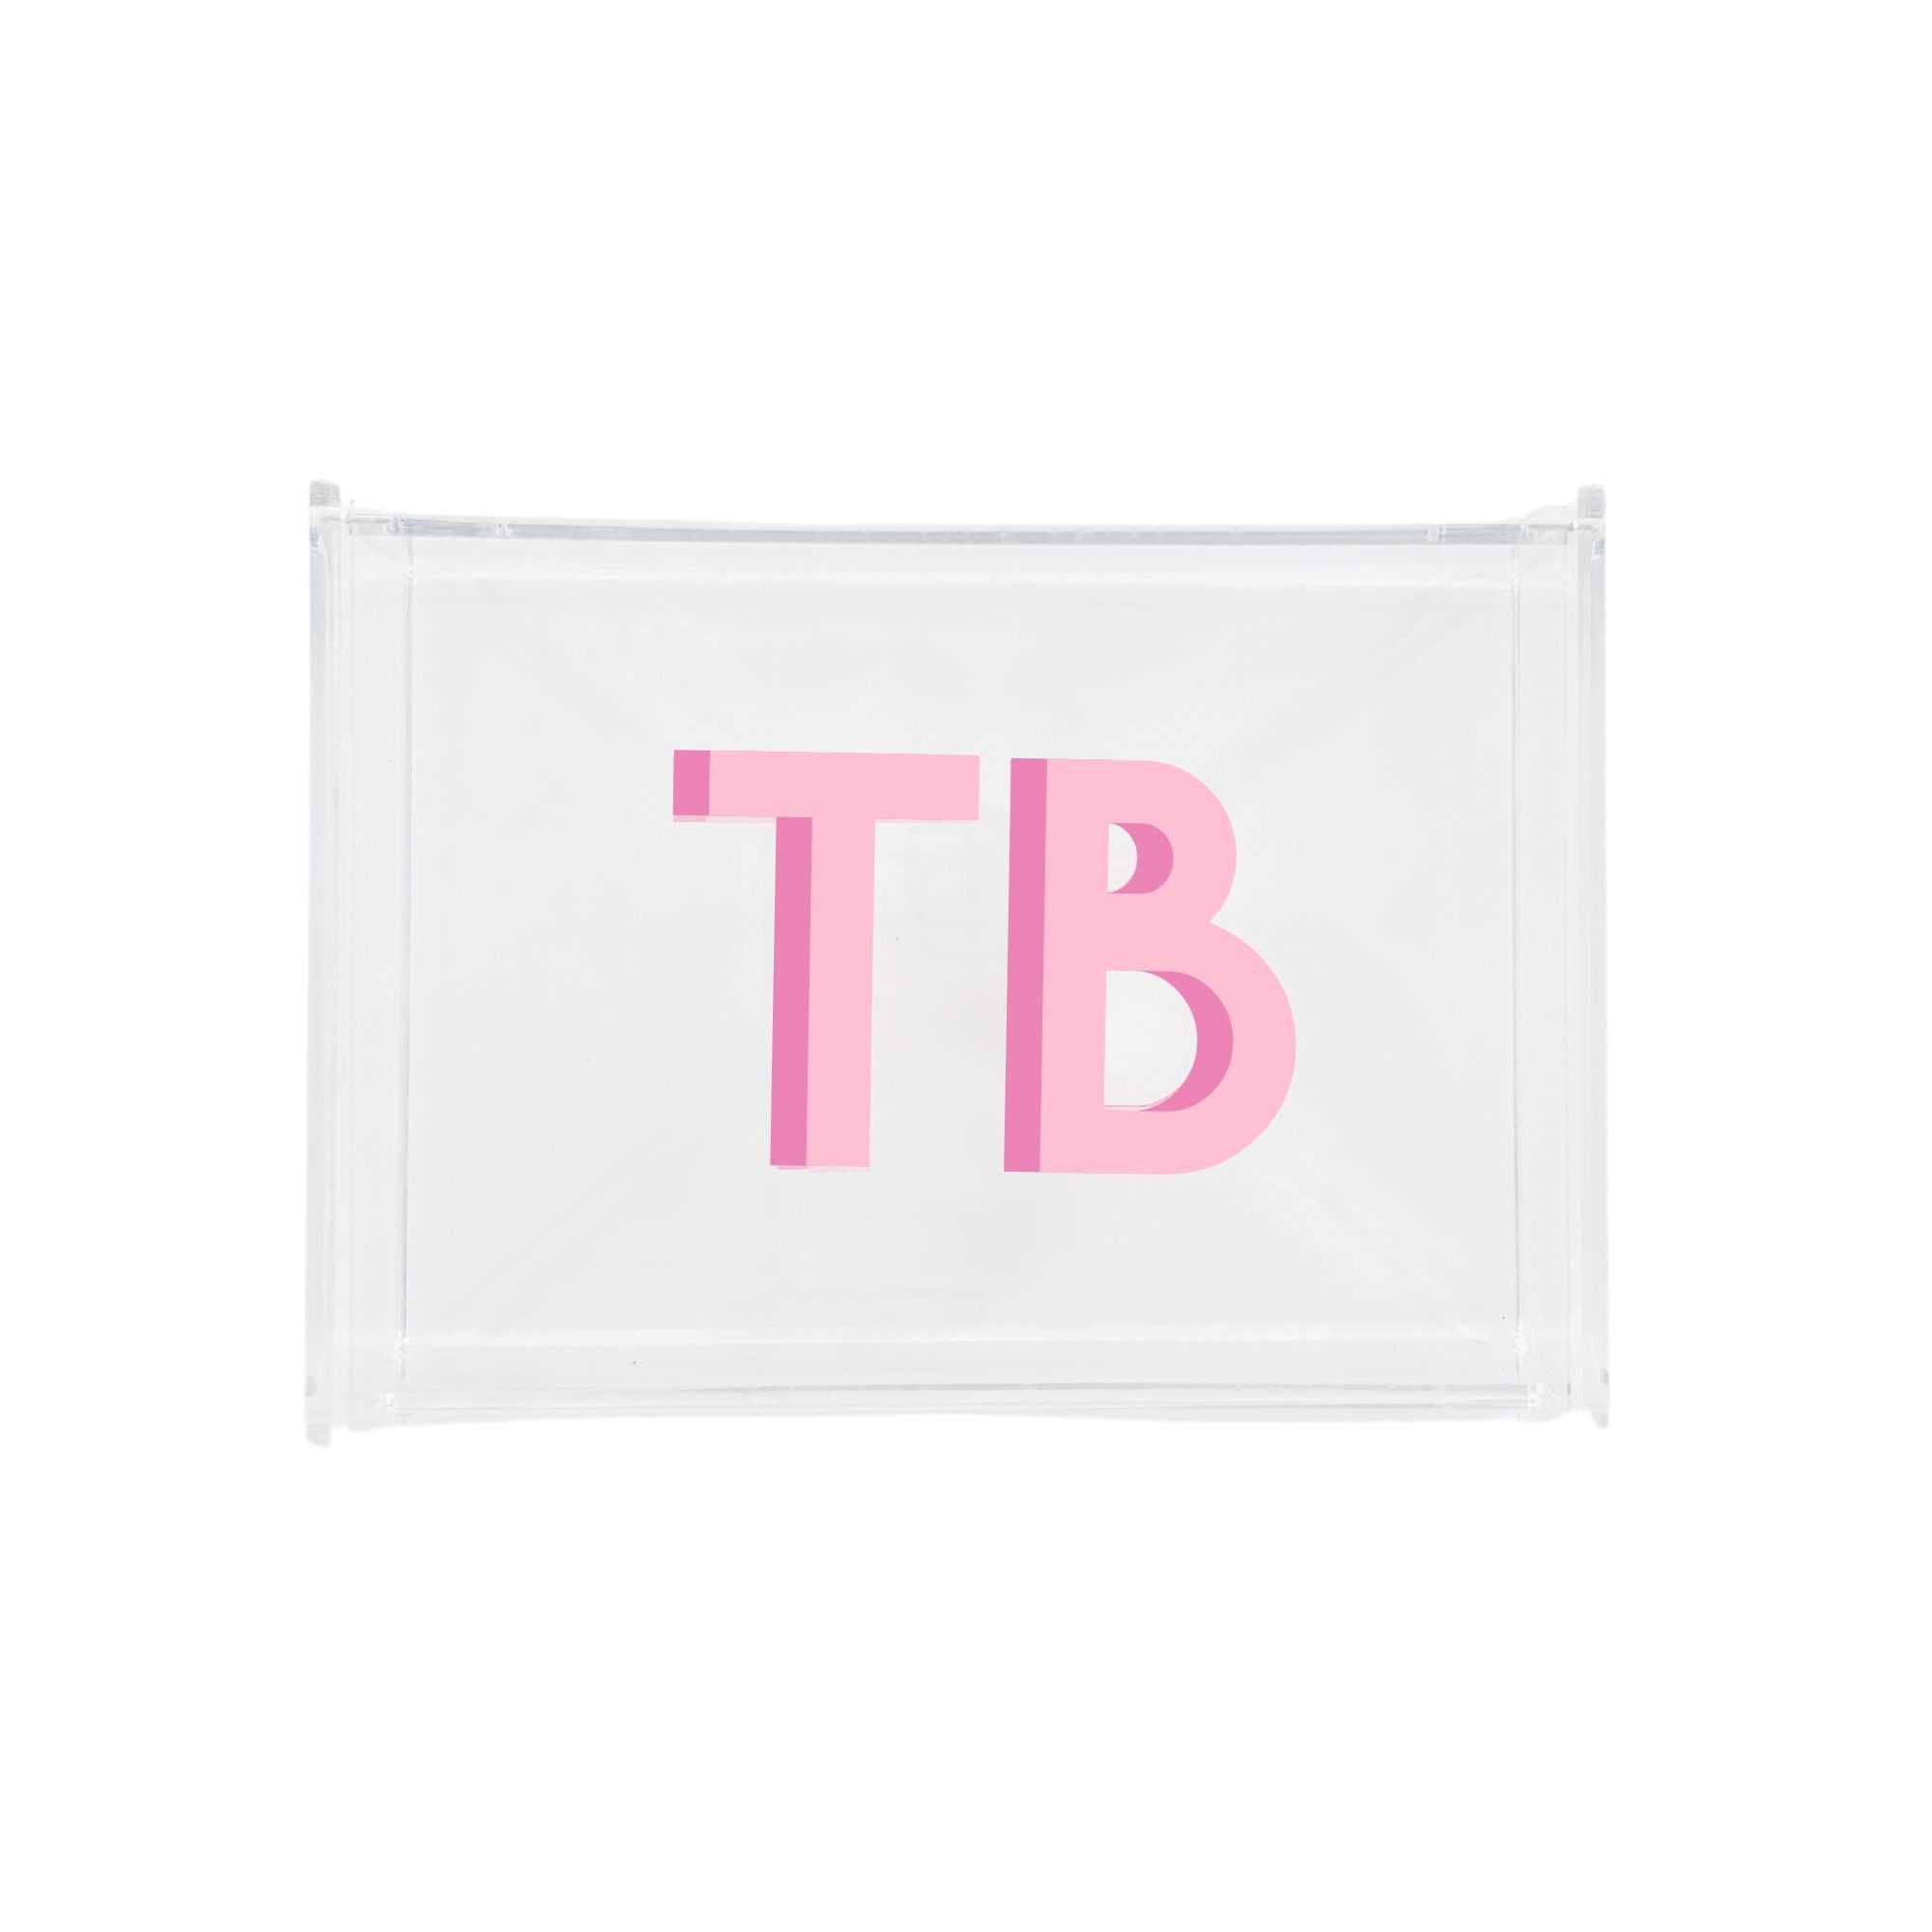 An acrylic catchall box is customized with a pink monogram.